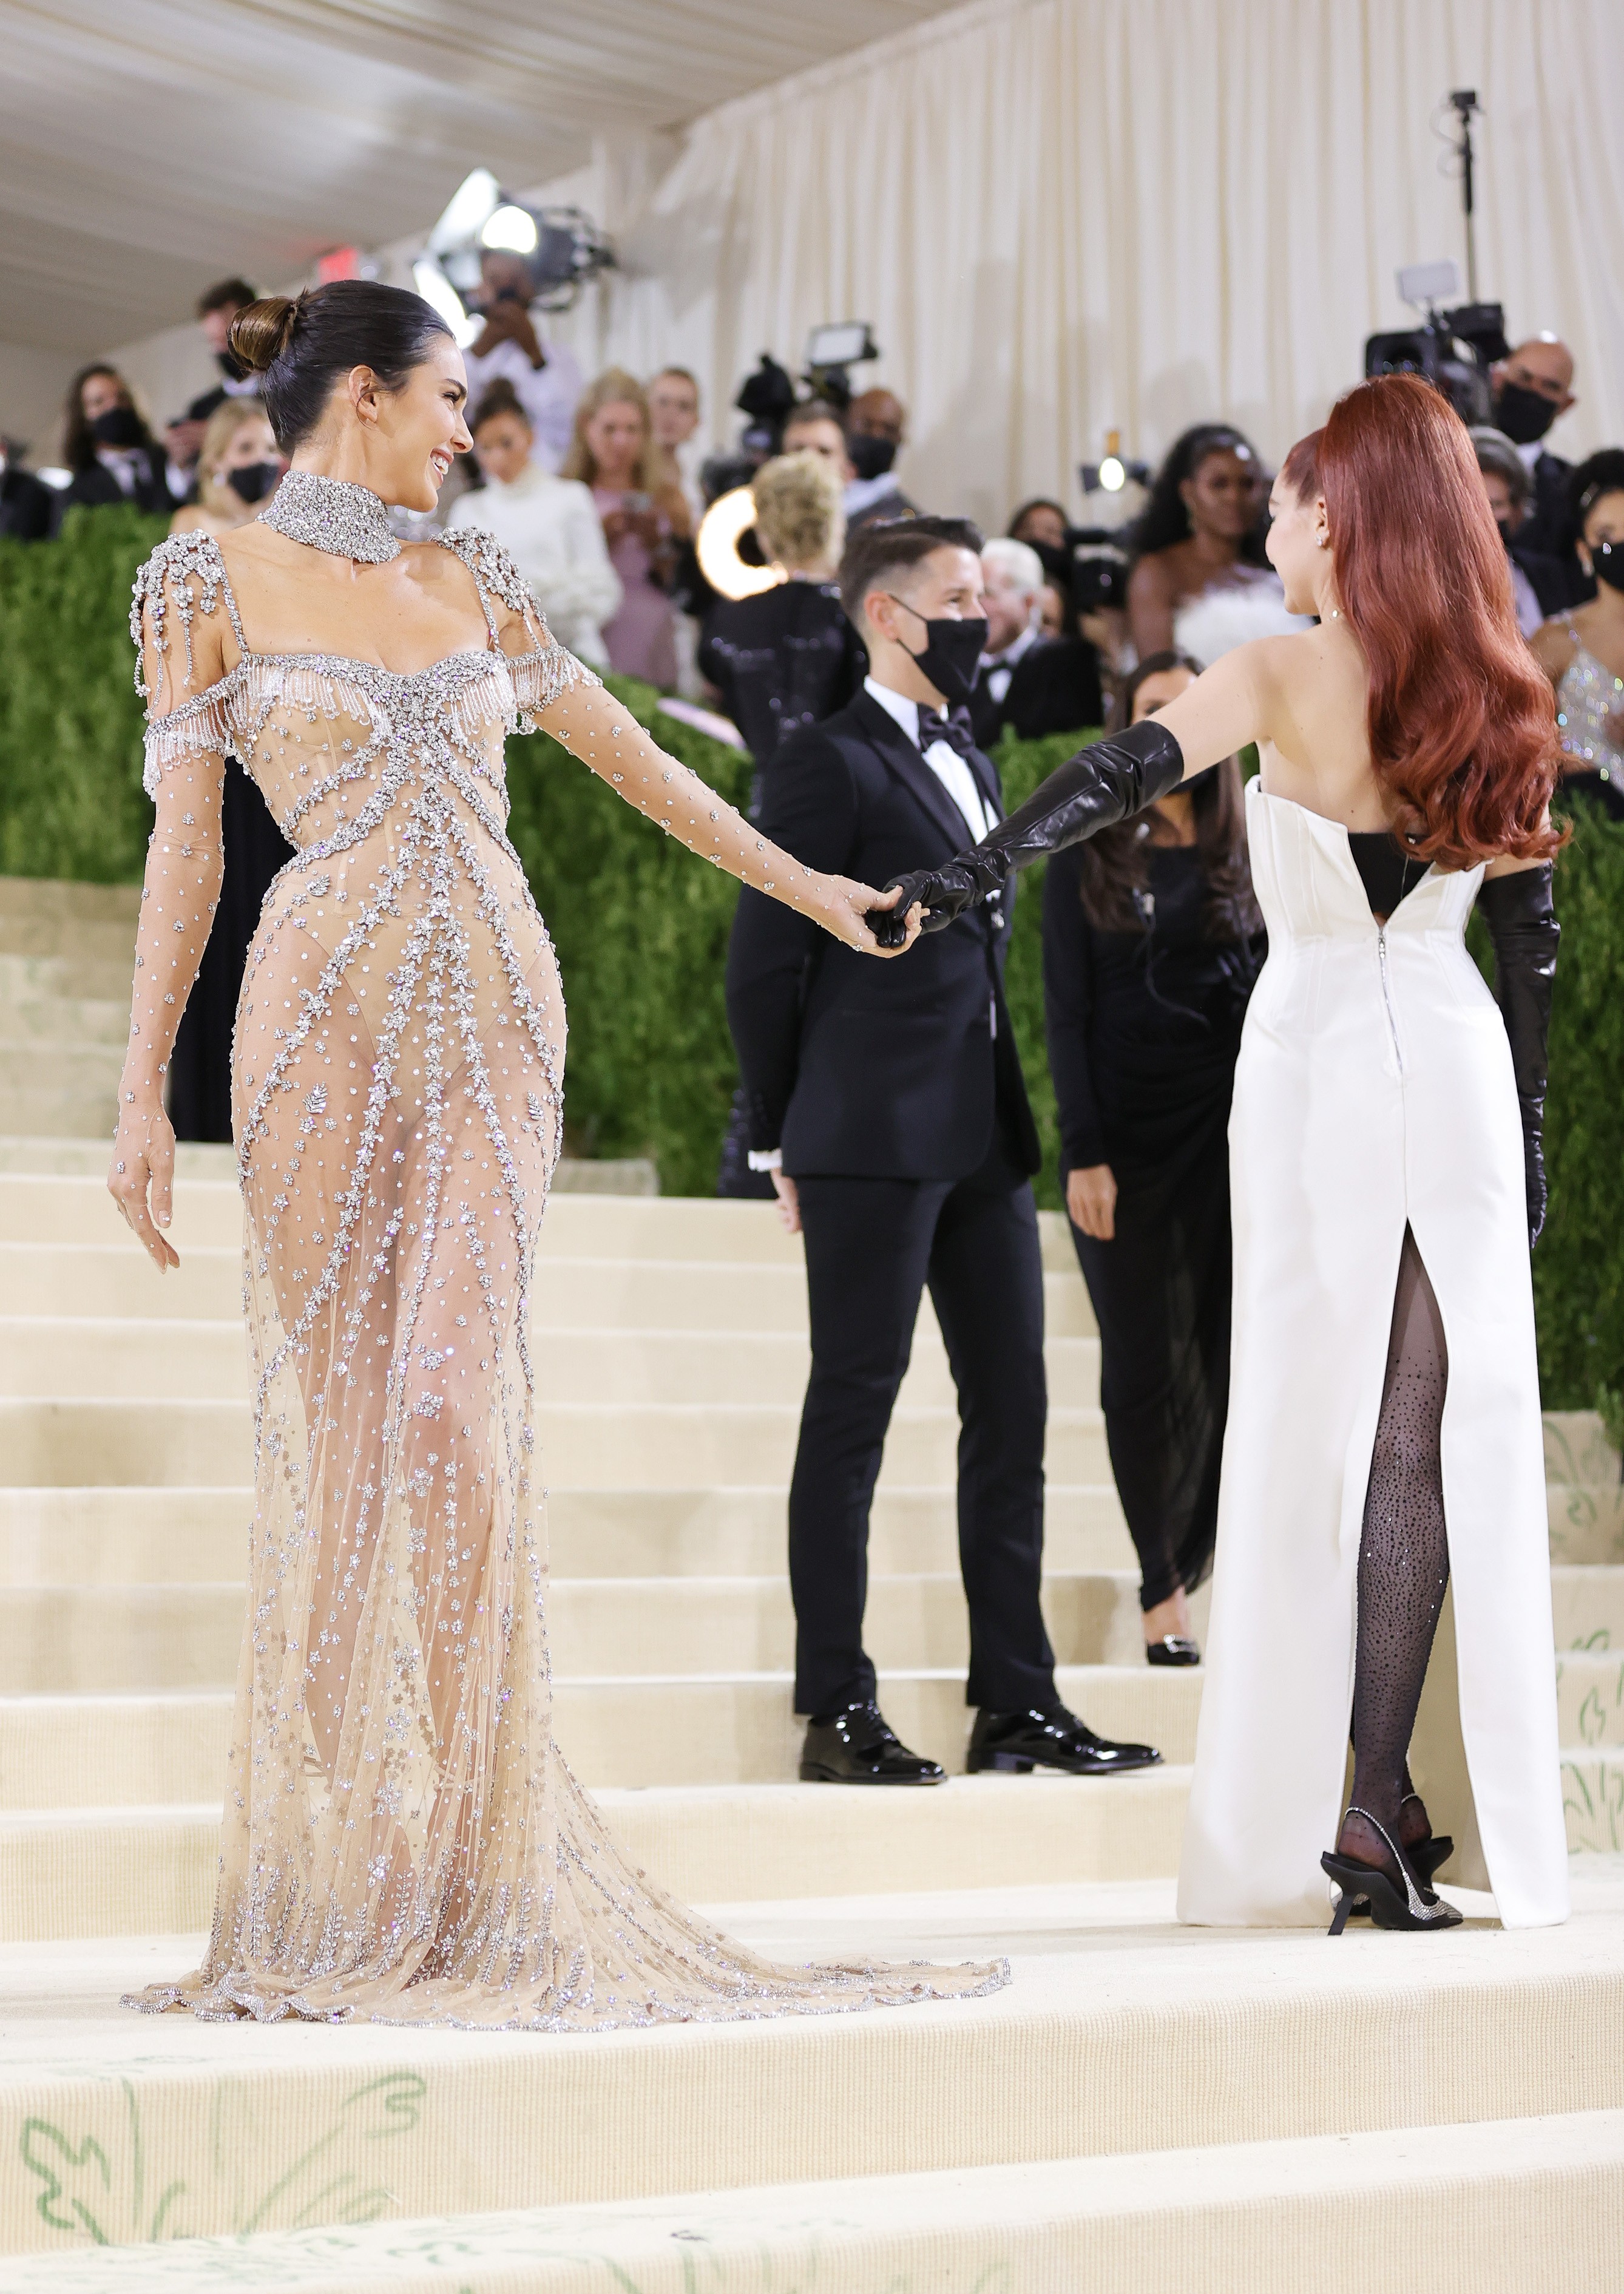 NEW YORK, NEW YORK - SEPTEMBER 13: Kendall Jenner and Gigi Hadid attend The 2021 Met Gala Celebrating In America: A Lexicon Of Fashion at Metropolitan Museum of Art on September 13, 2021 in New York City. (Photo by Mike Coppola/Getty Images) (Foto: Getty Images)